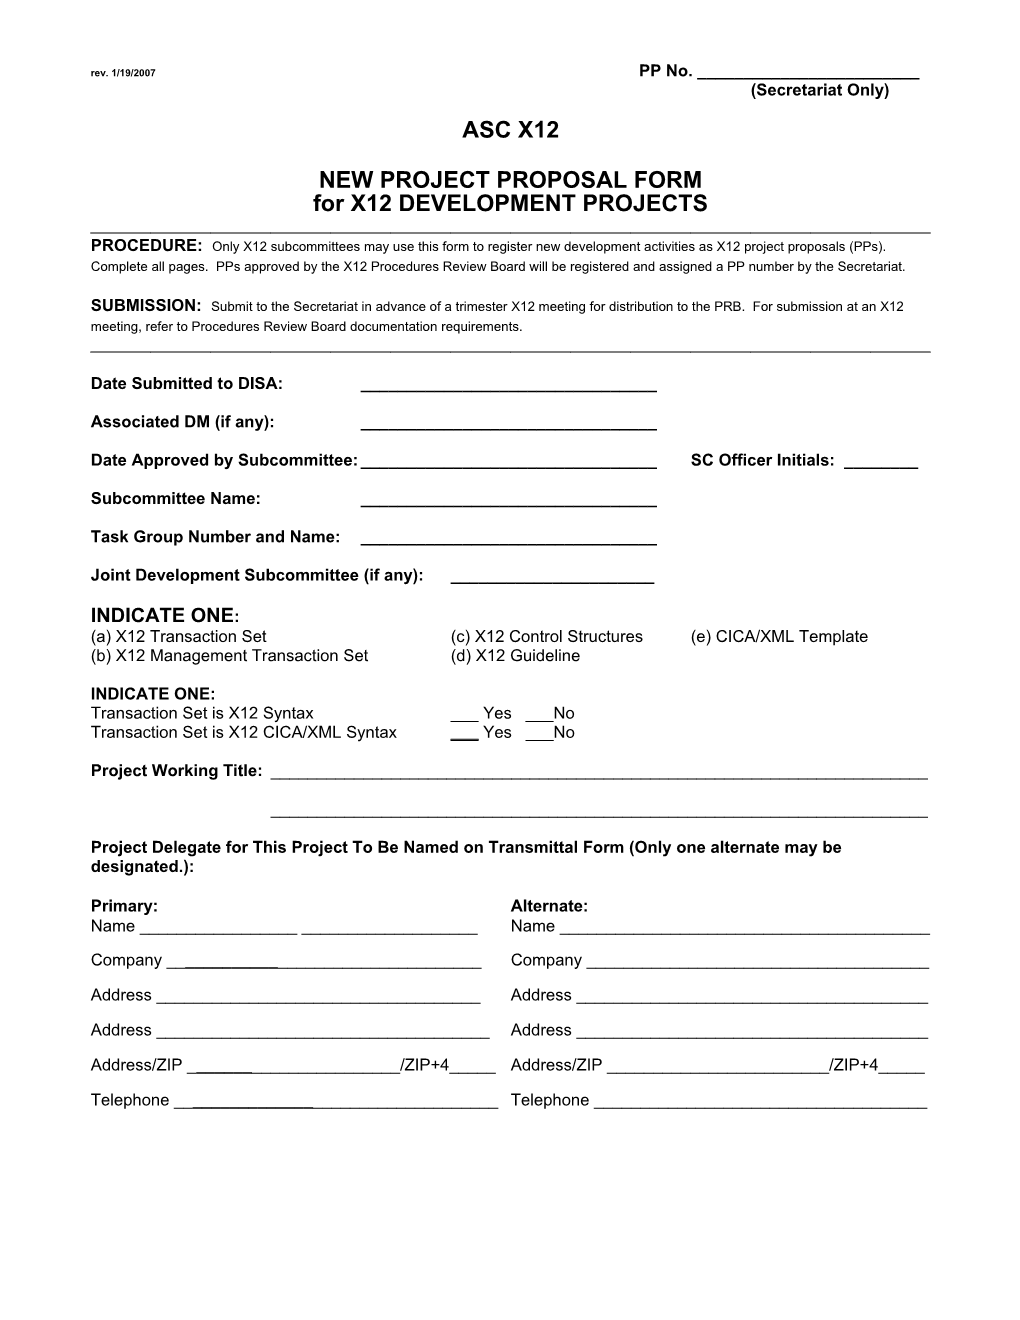 New Project Proposal Form